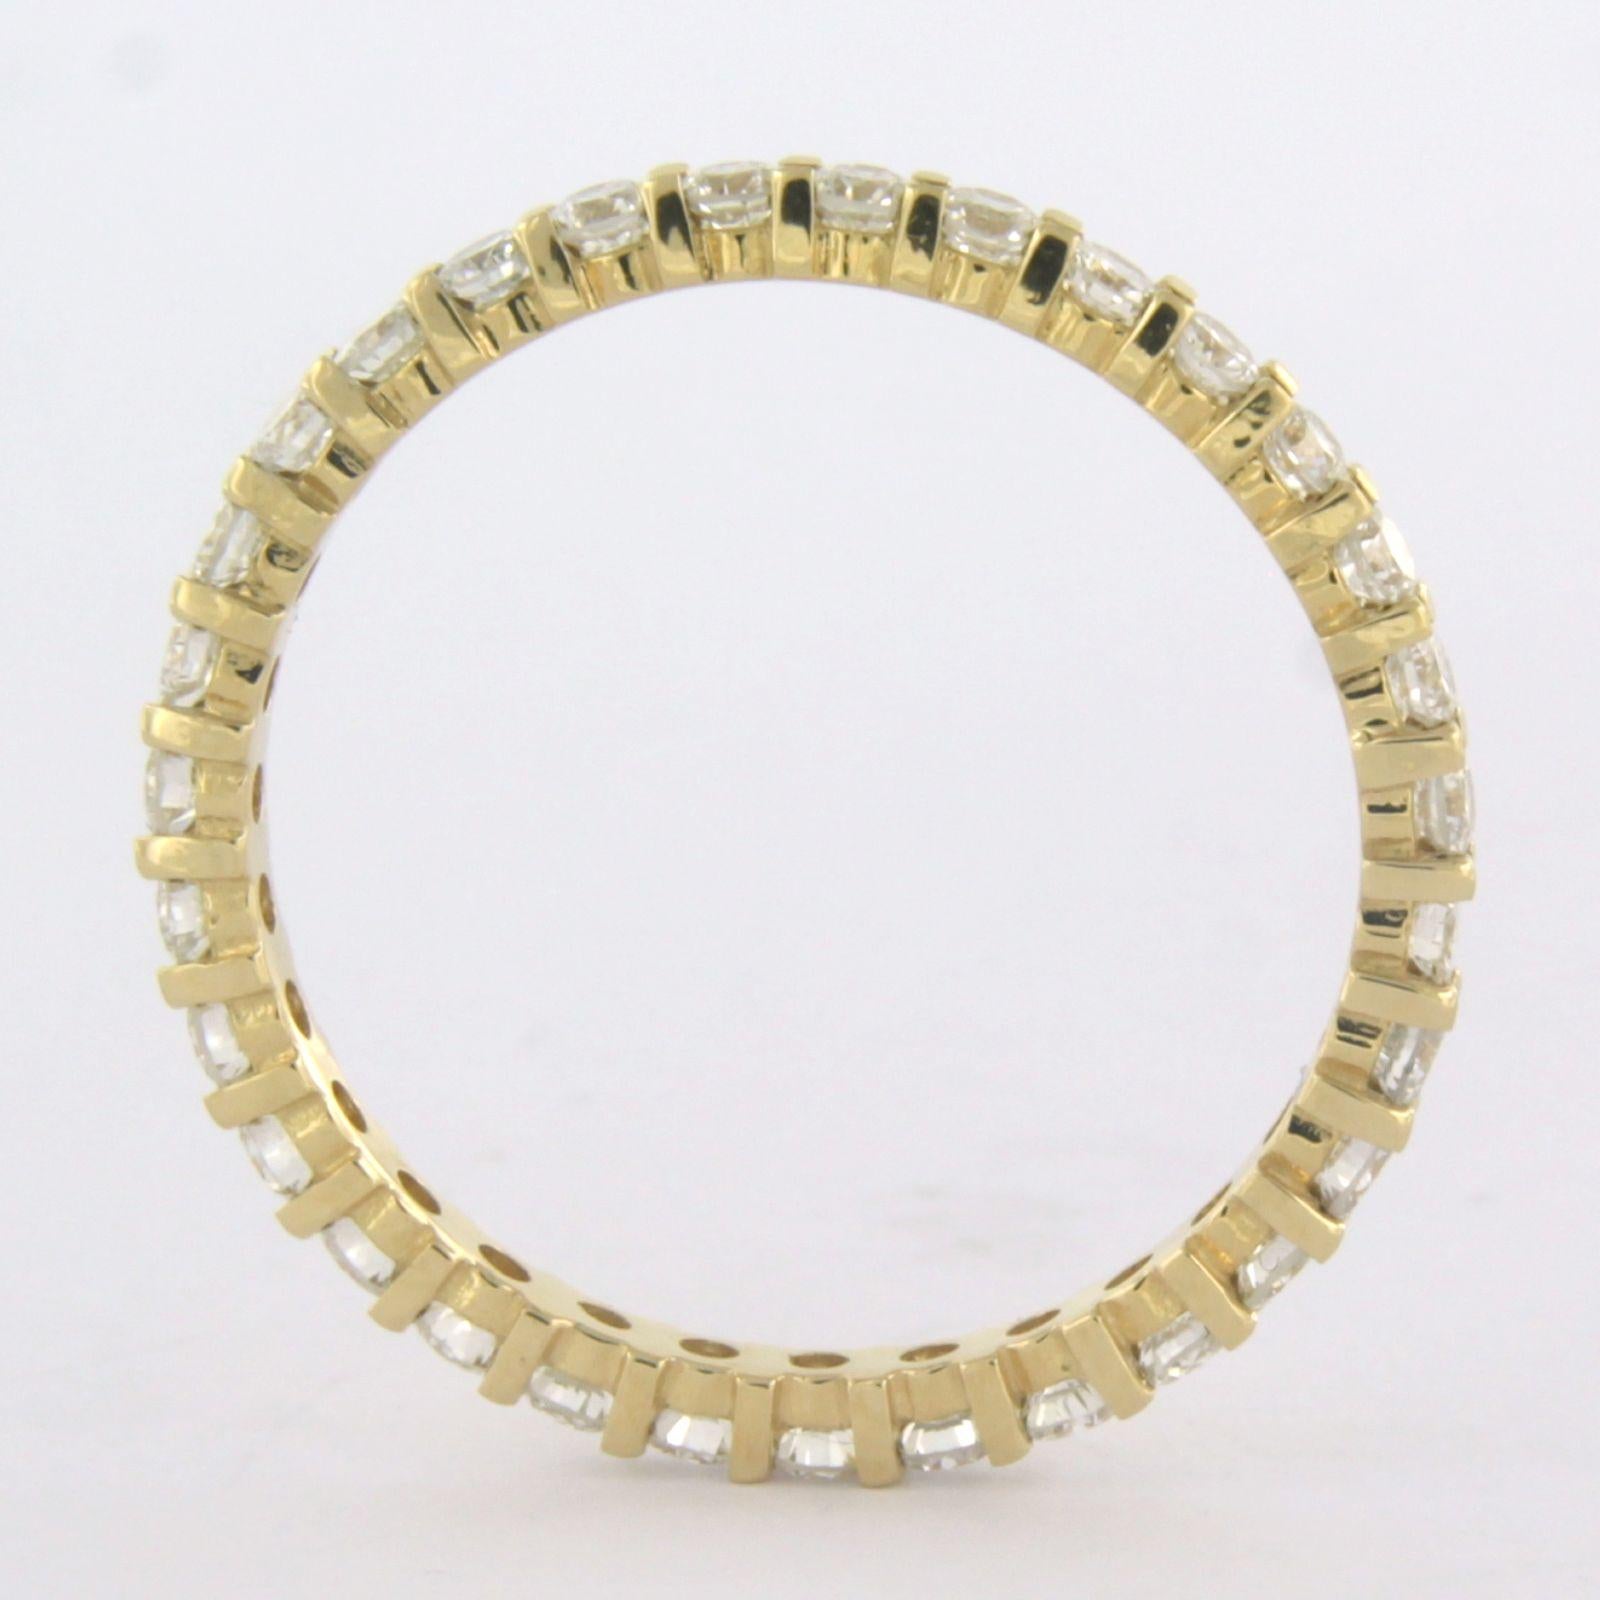 18 kt yellow gold eternity ring set with brilliant cut diamond 0.96 ct G/H VS/SI - ring size 57

detailed description

The top of the ring is 2.0 mm wide and 2.0 mm high

weight 1.8 grams

Set with

- 31 x 2.0 mm brilliant cut diamond, approx. 0.96